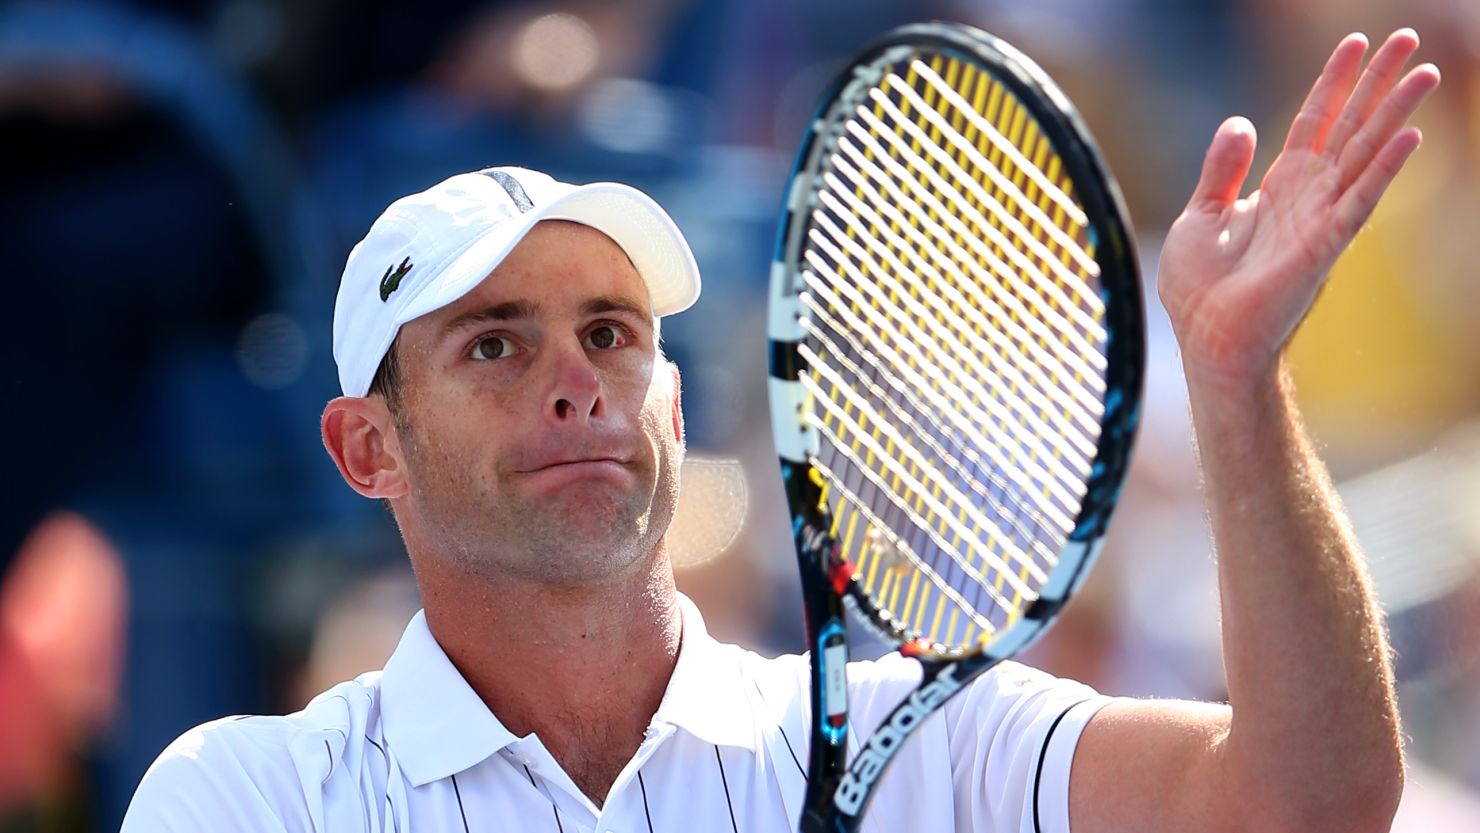 Andy Roddick was the last American man to win the U.S. Open in 2003.